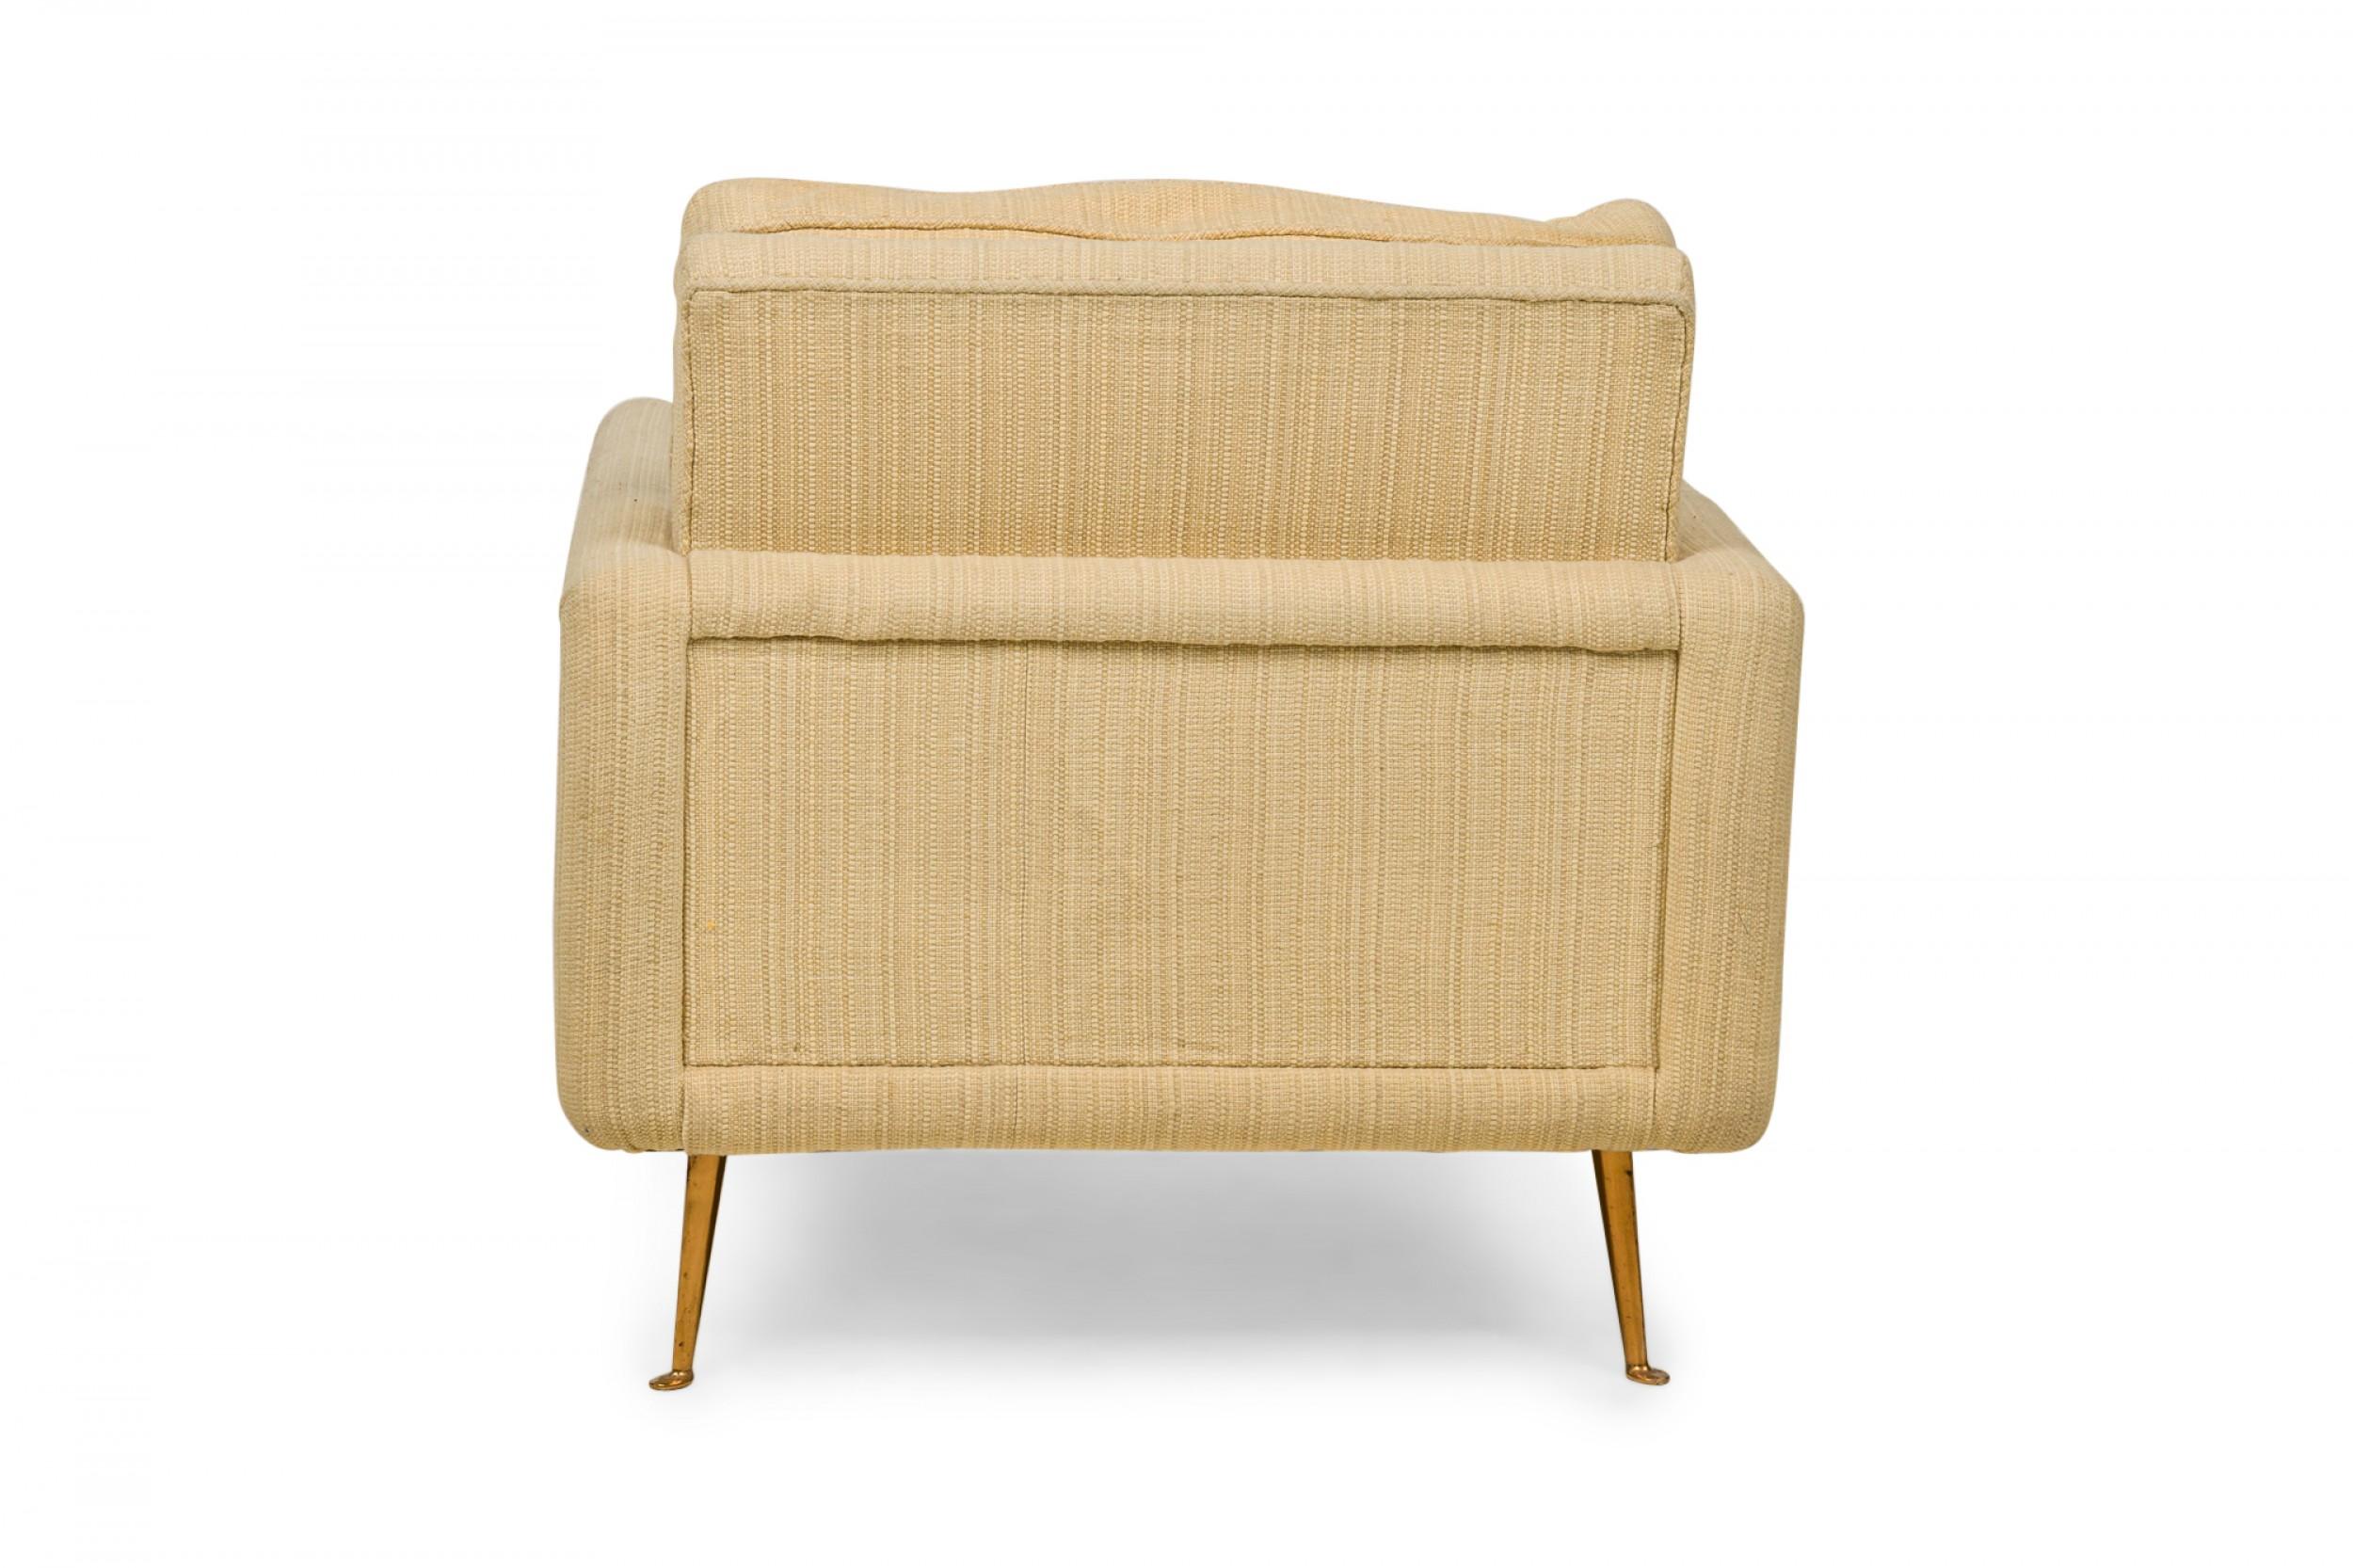 American Contemporary Beige Fabric Upholstered Bronze Leg Lounge / Armchair im Zustand „Gut“ im Angebot in New York, NY